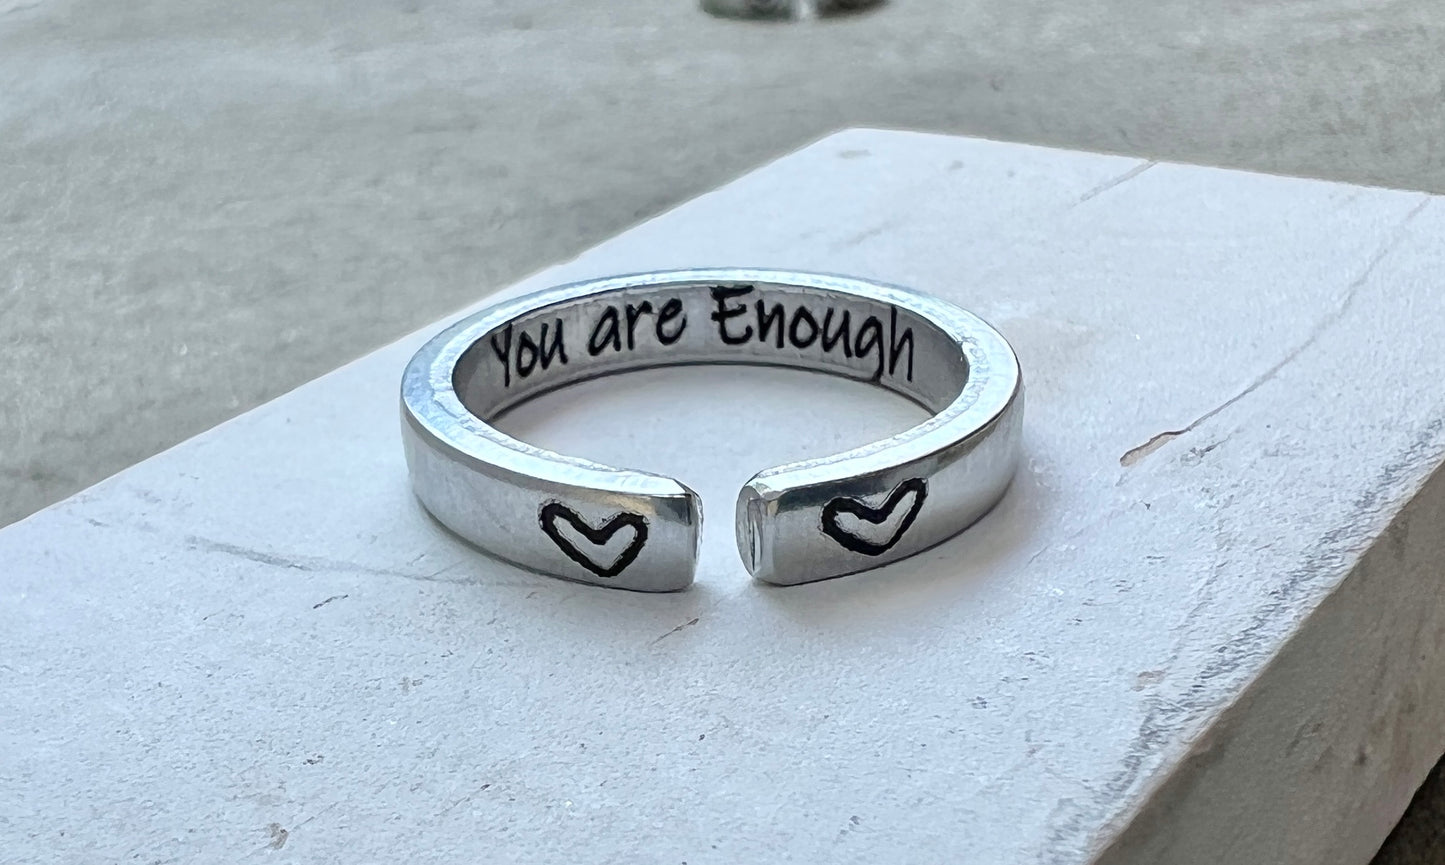 You are Enough Ring, Aluminum and Adjustable